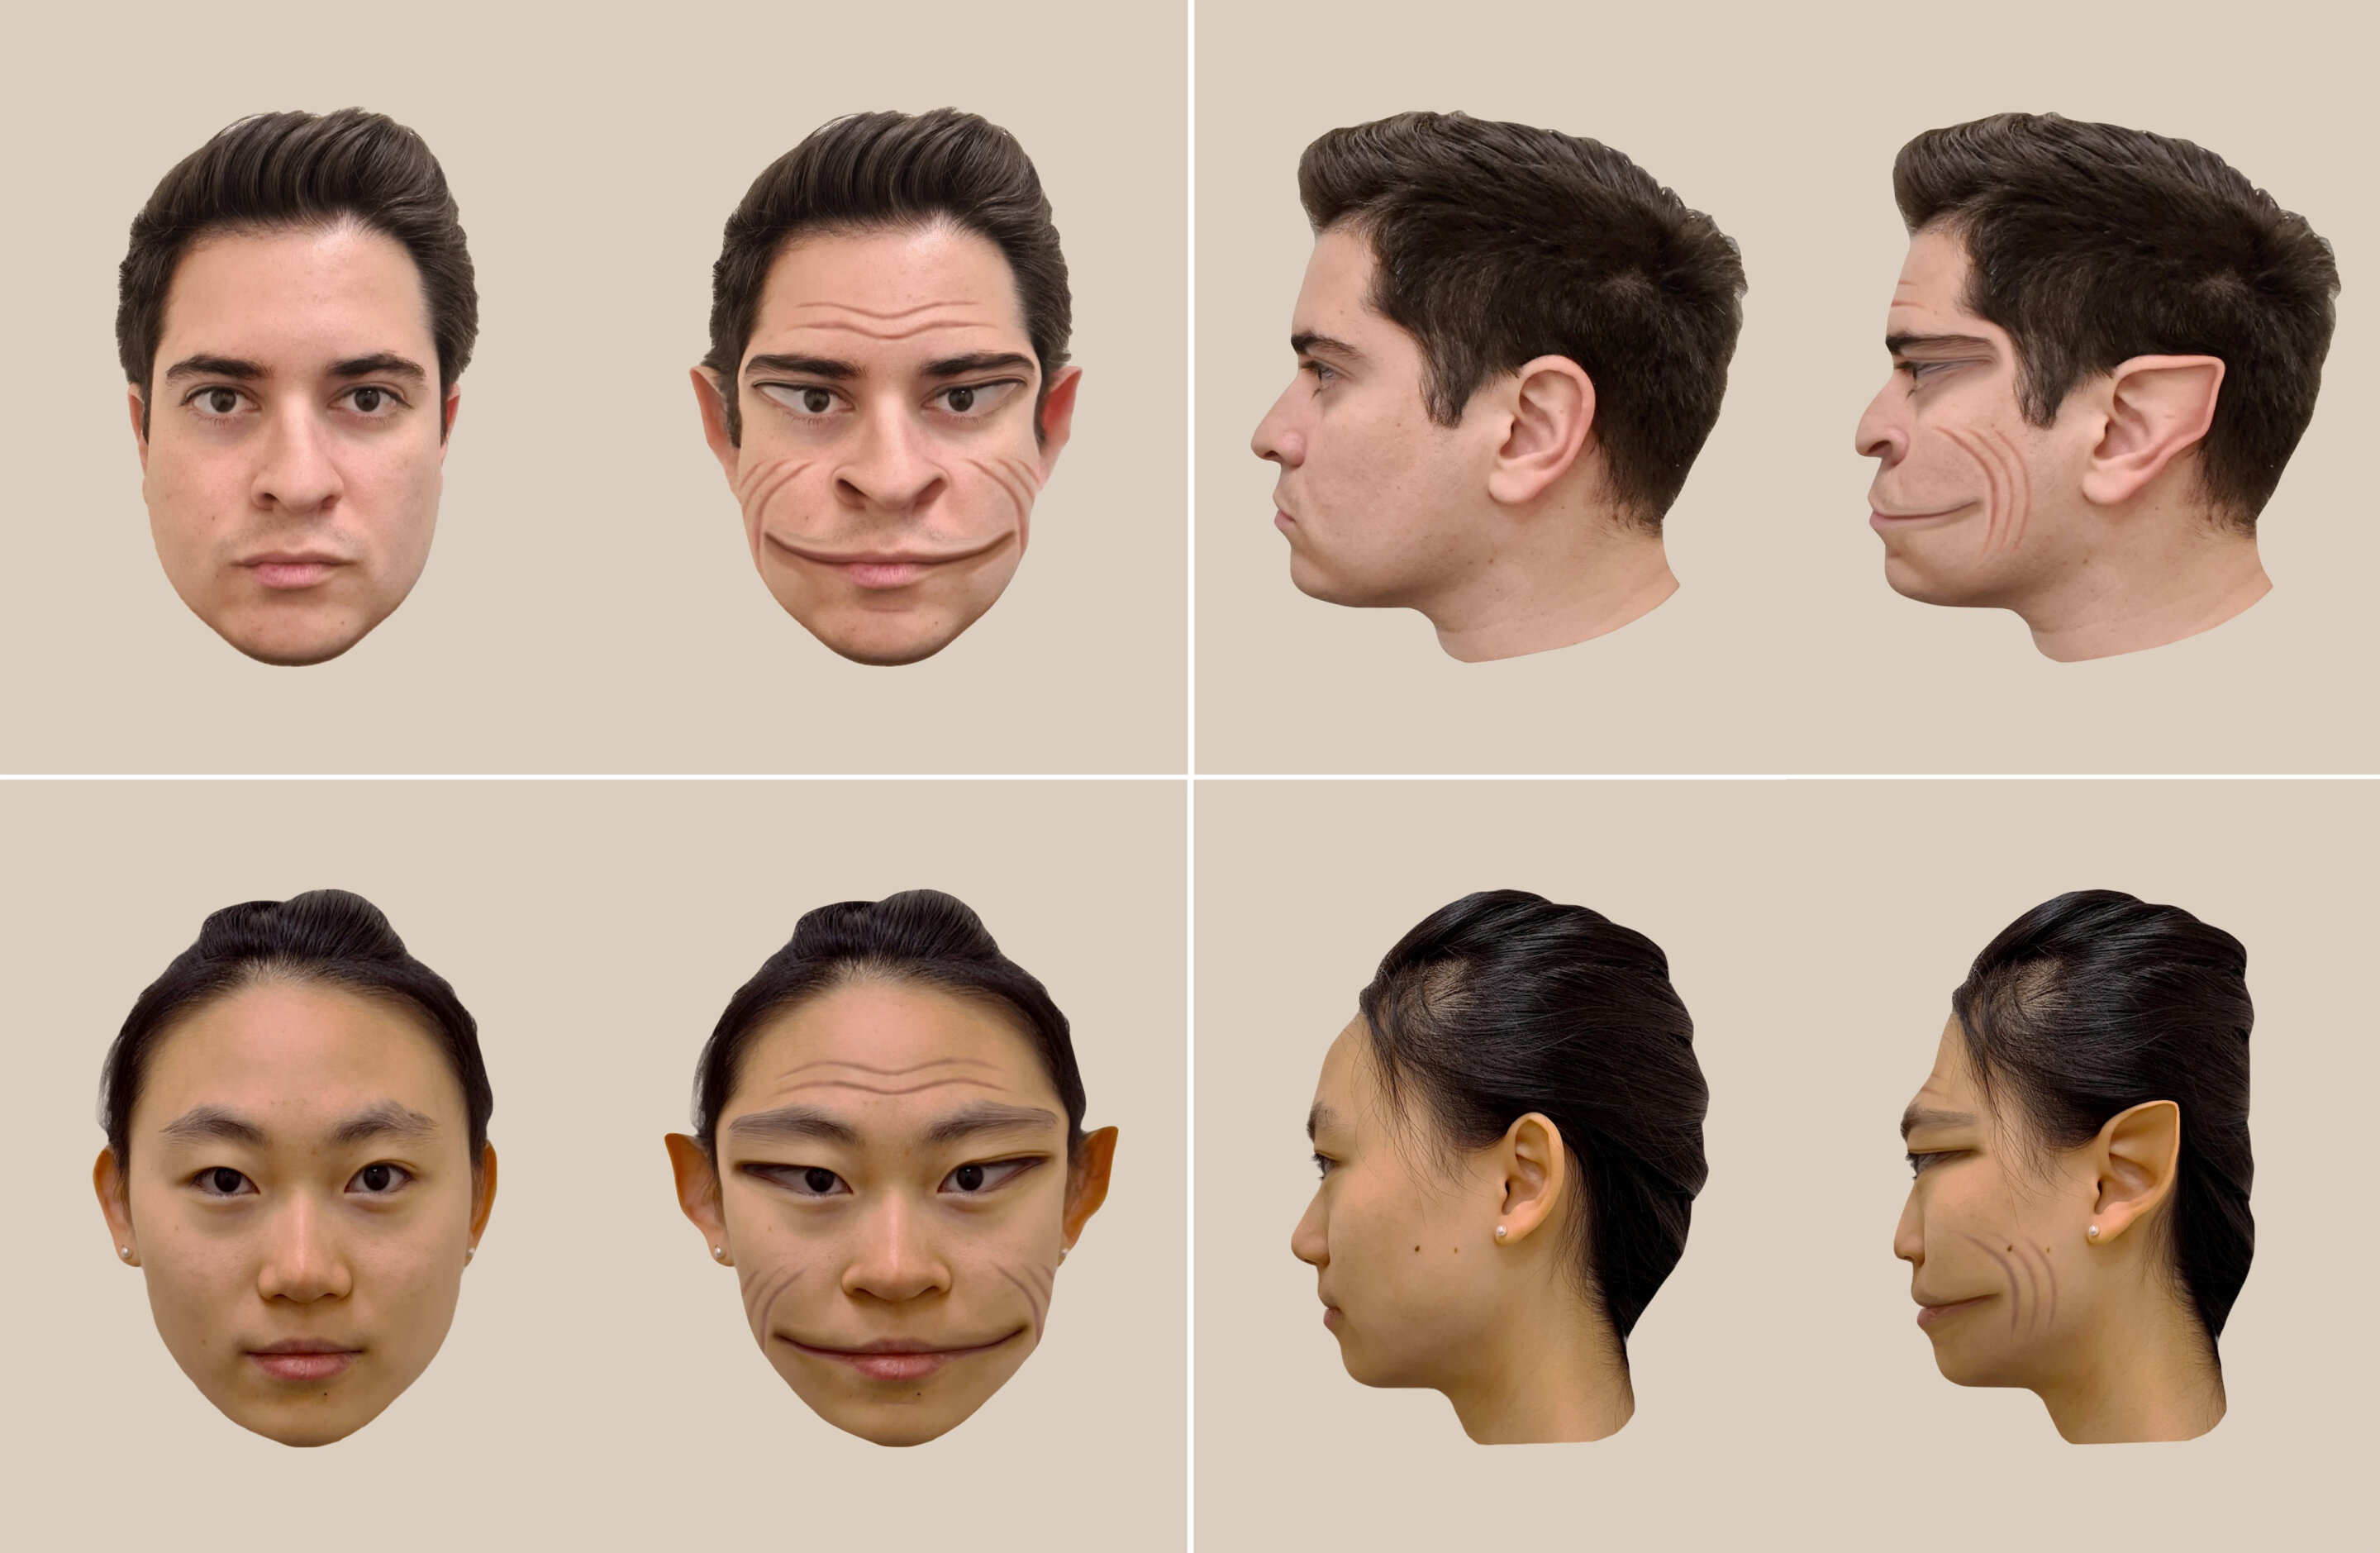 Research visualizes 'demonic' face distortions in a case of prosopometamorphopsia